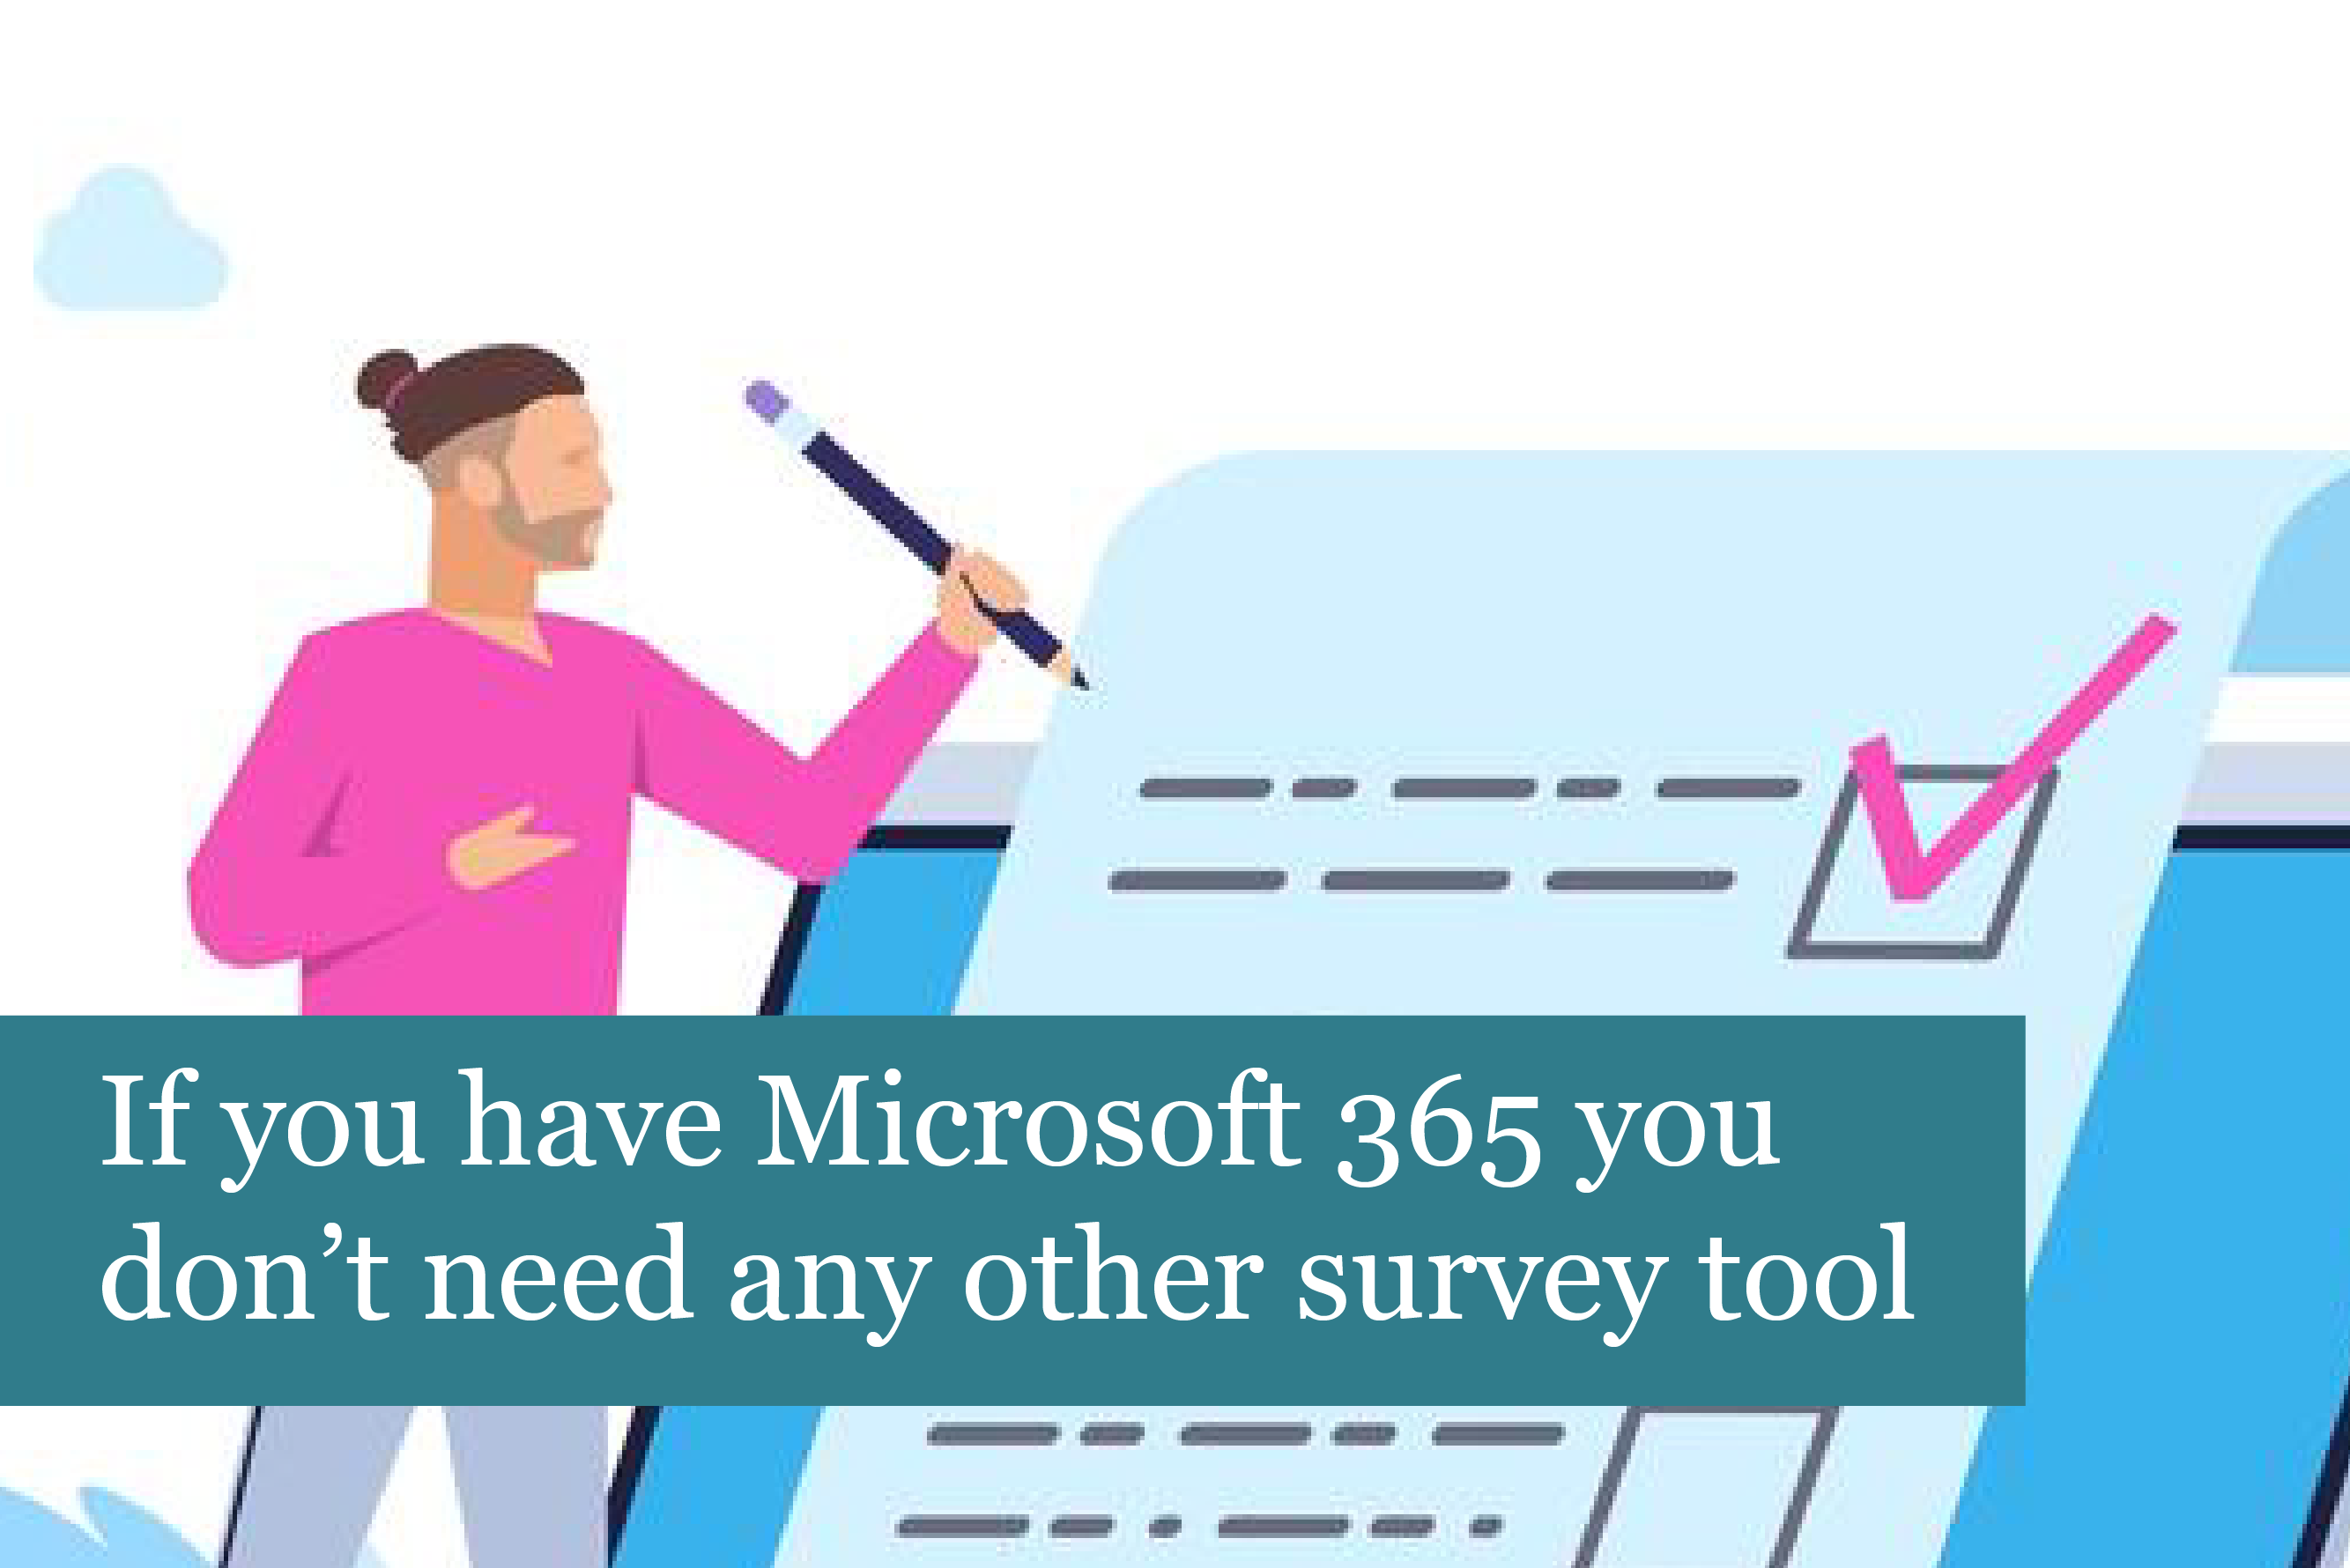 If you have Microsoft 365 you don’t need any other survey tool